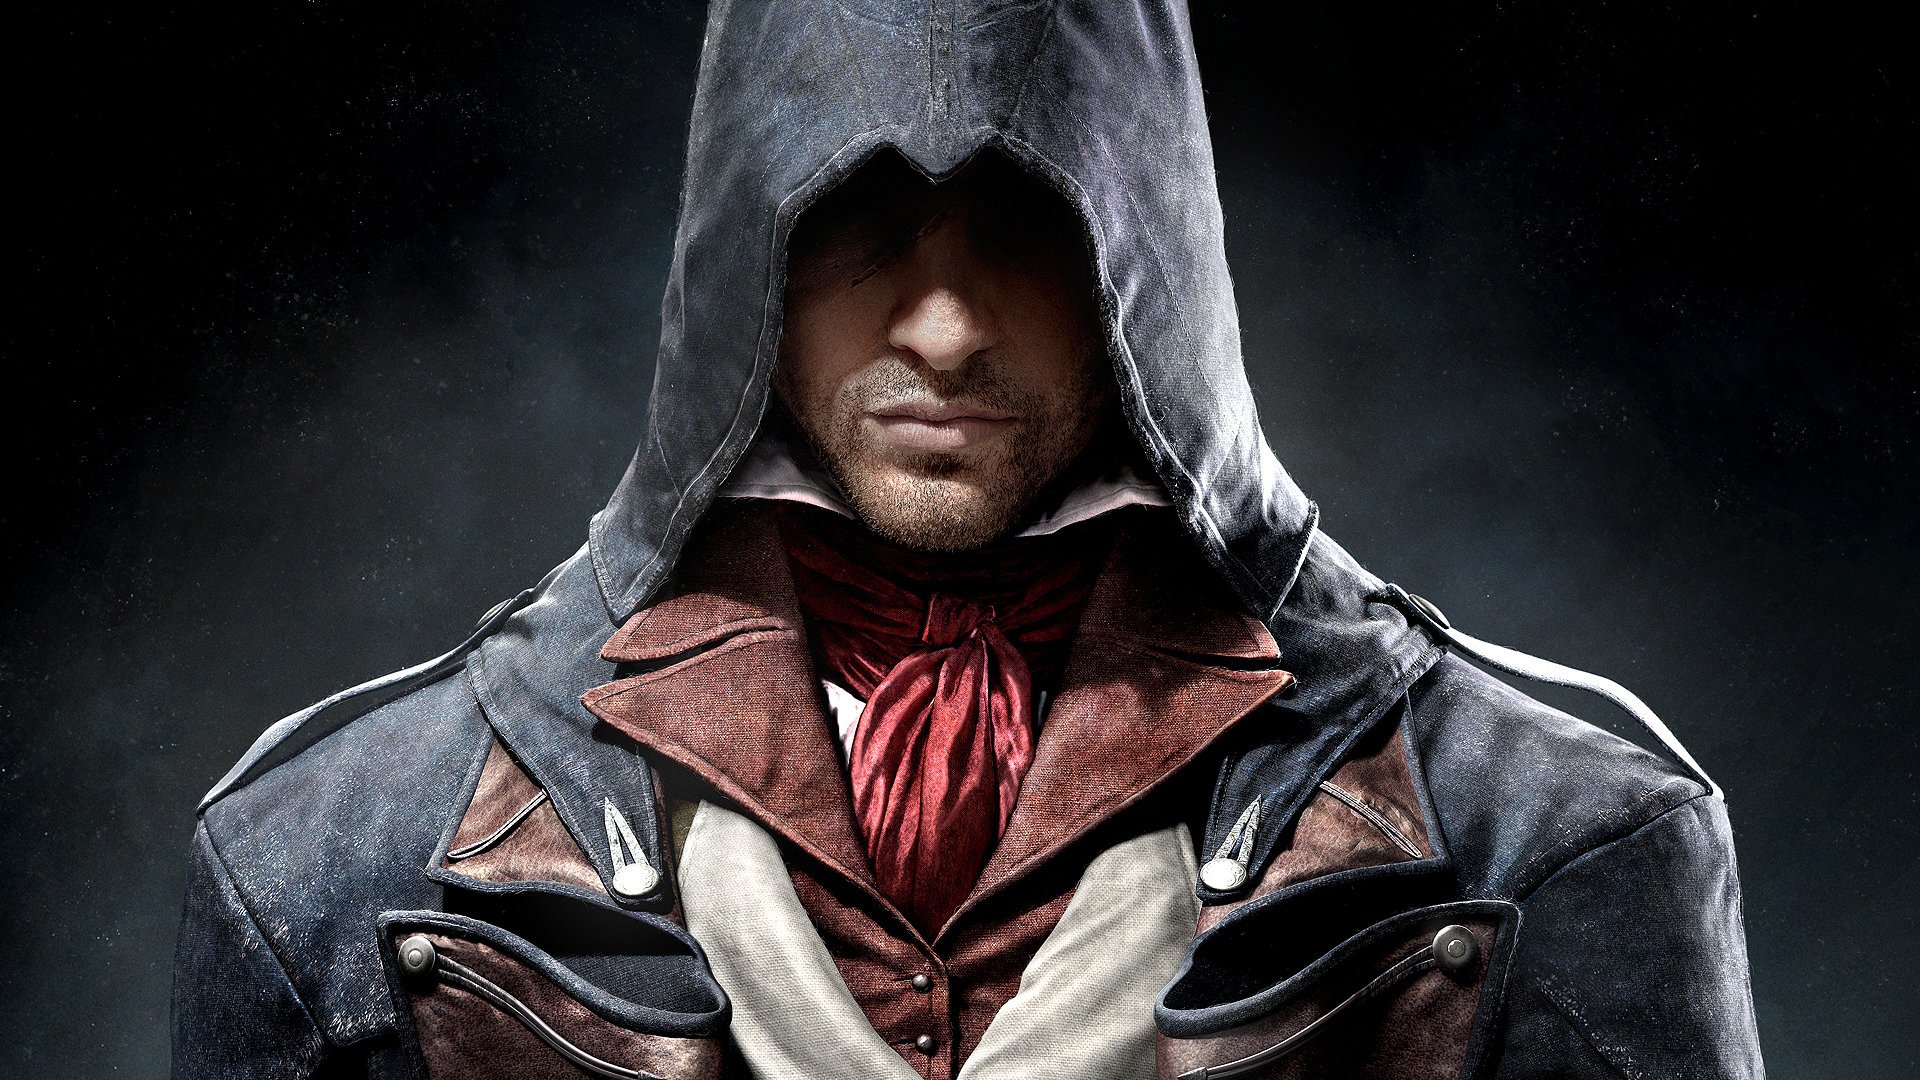 Assassin's Creed Unity Mod fixes cloth physics, adds wind effects